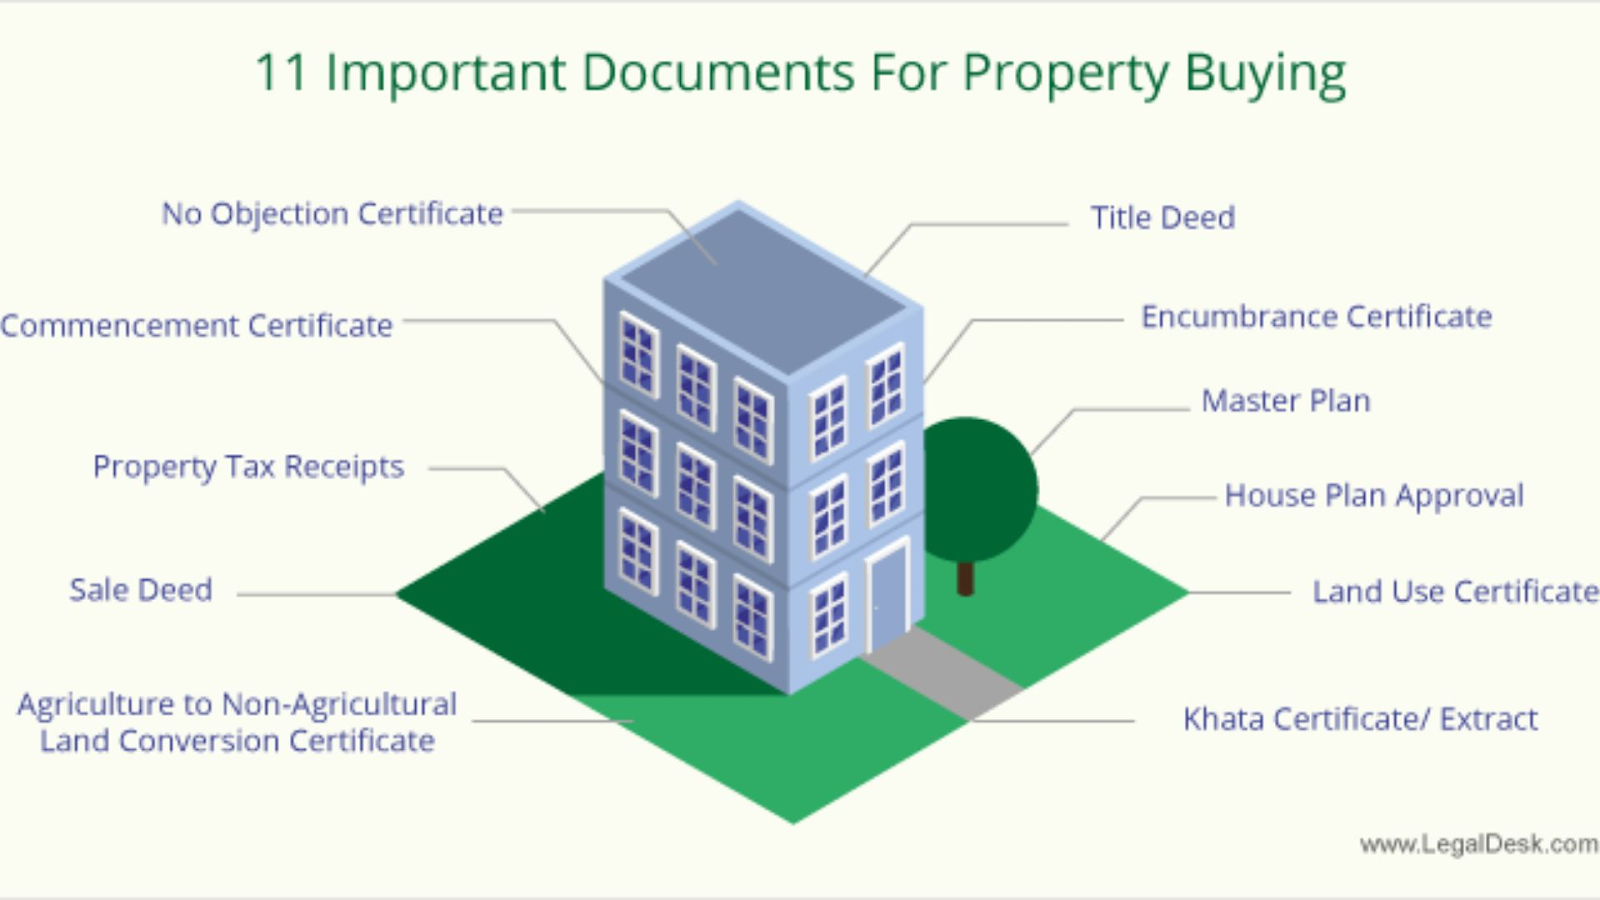 Important documents that you should know